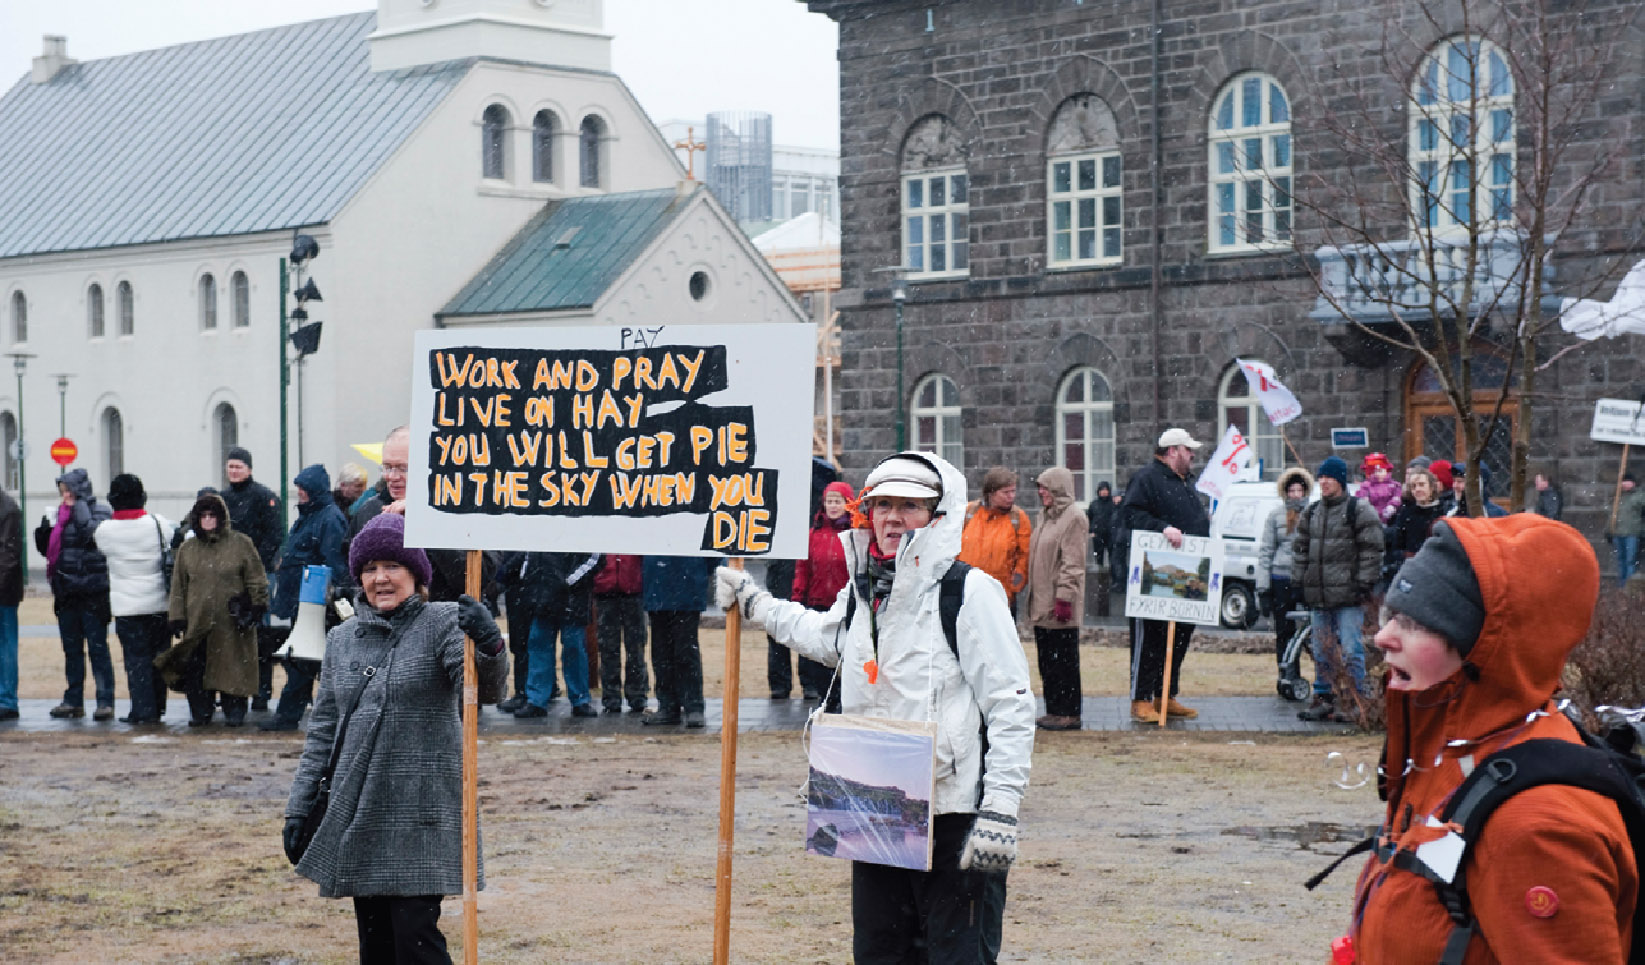 Protesters outside the Icelandic parliament in Reykjavik demand that the government do more to improve conditions for the recently poor.